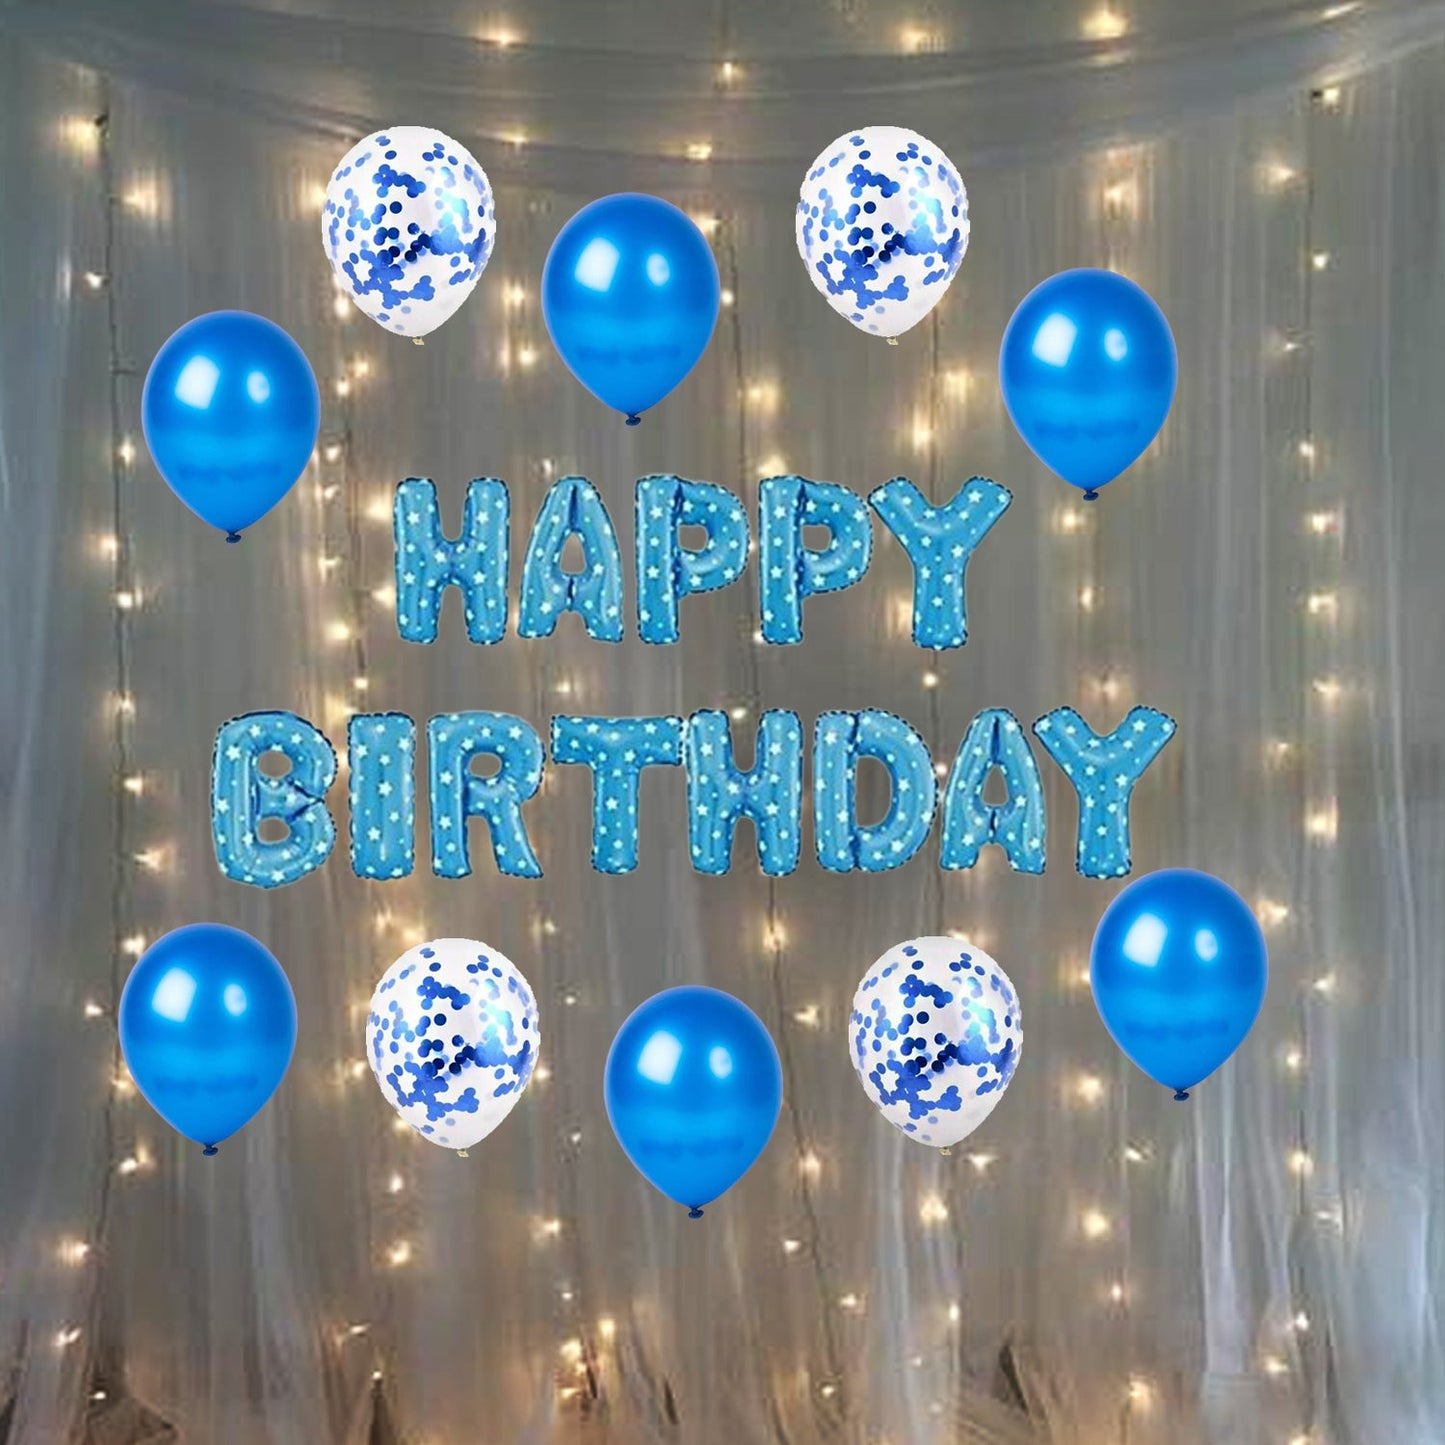 Blue Birthday Party Decoration Items for adults – Pack of 30 Pcs – Happy Birthday Foil, Fairy Light, Confetti & Metallic Balloons - CherishX Partystore